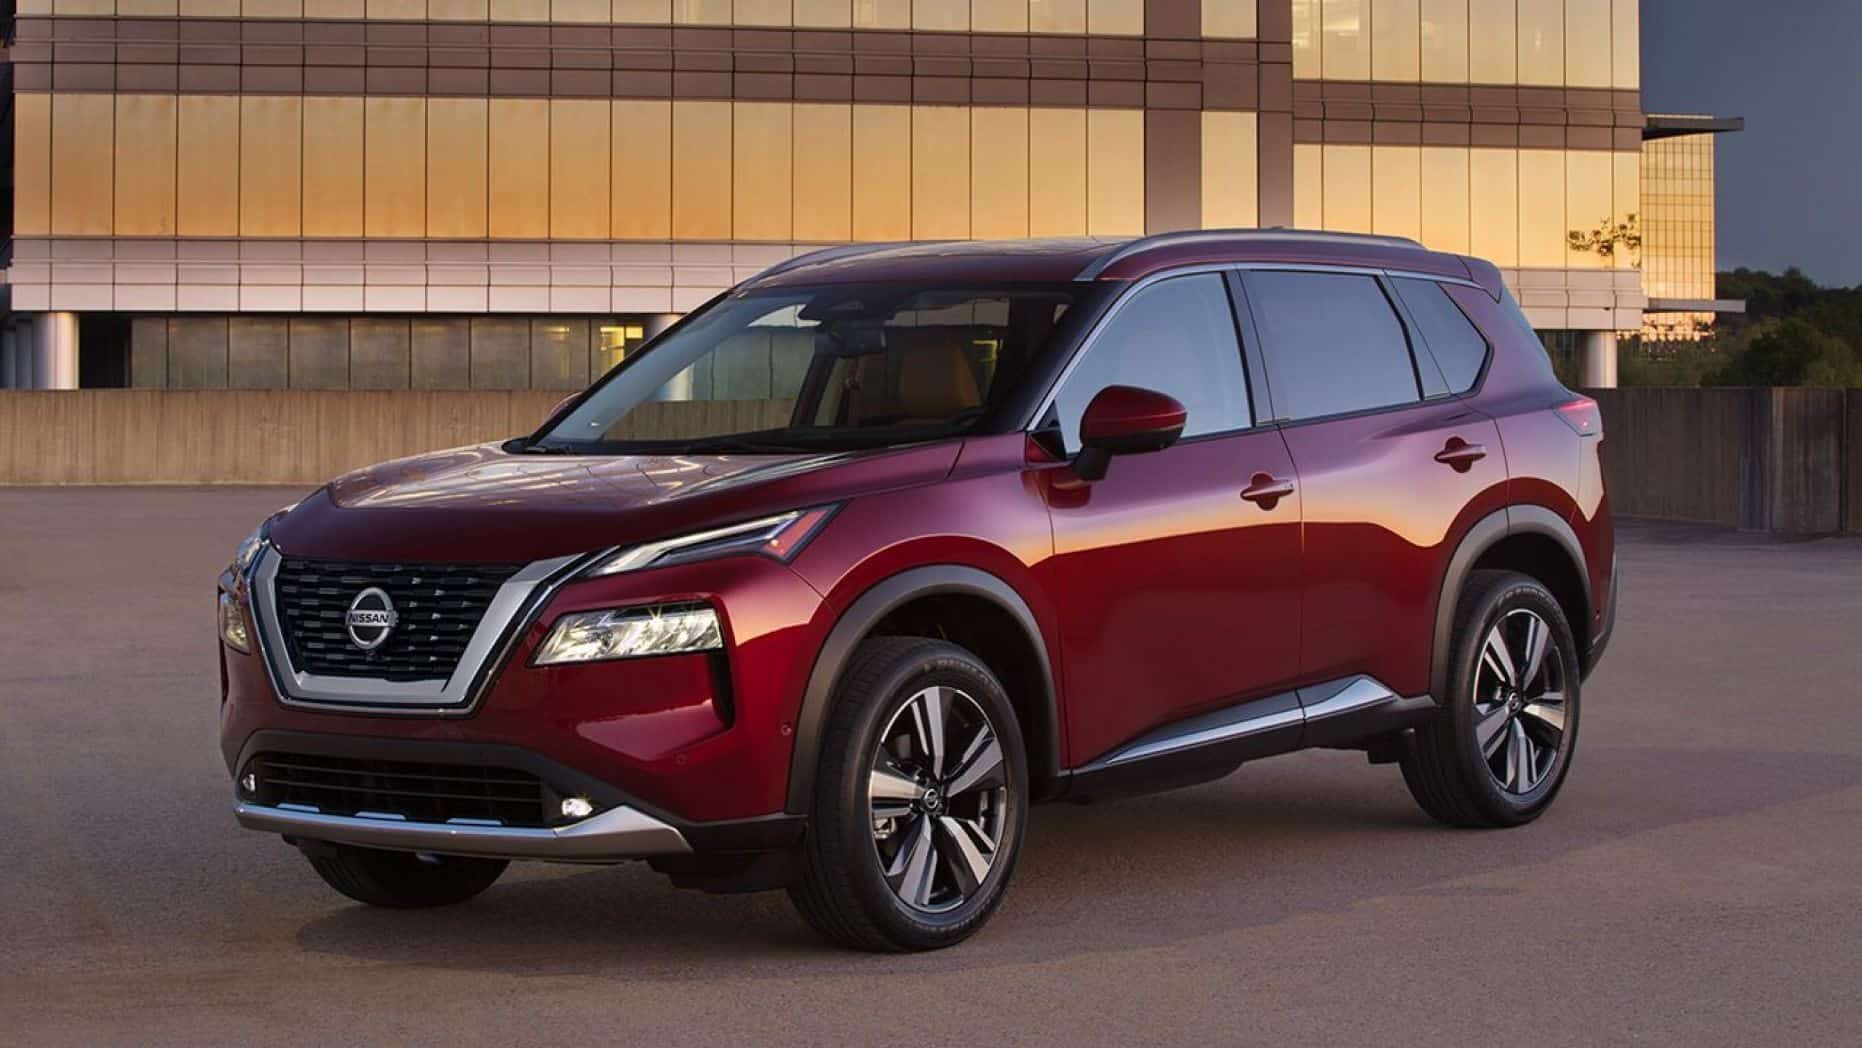 2021 Nissan Rogue Introduced